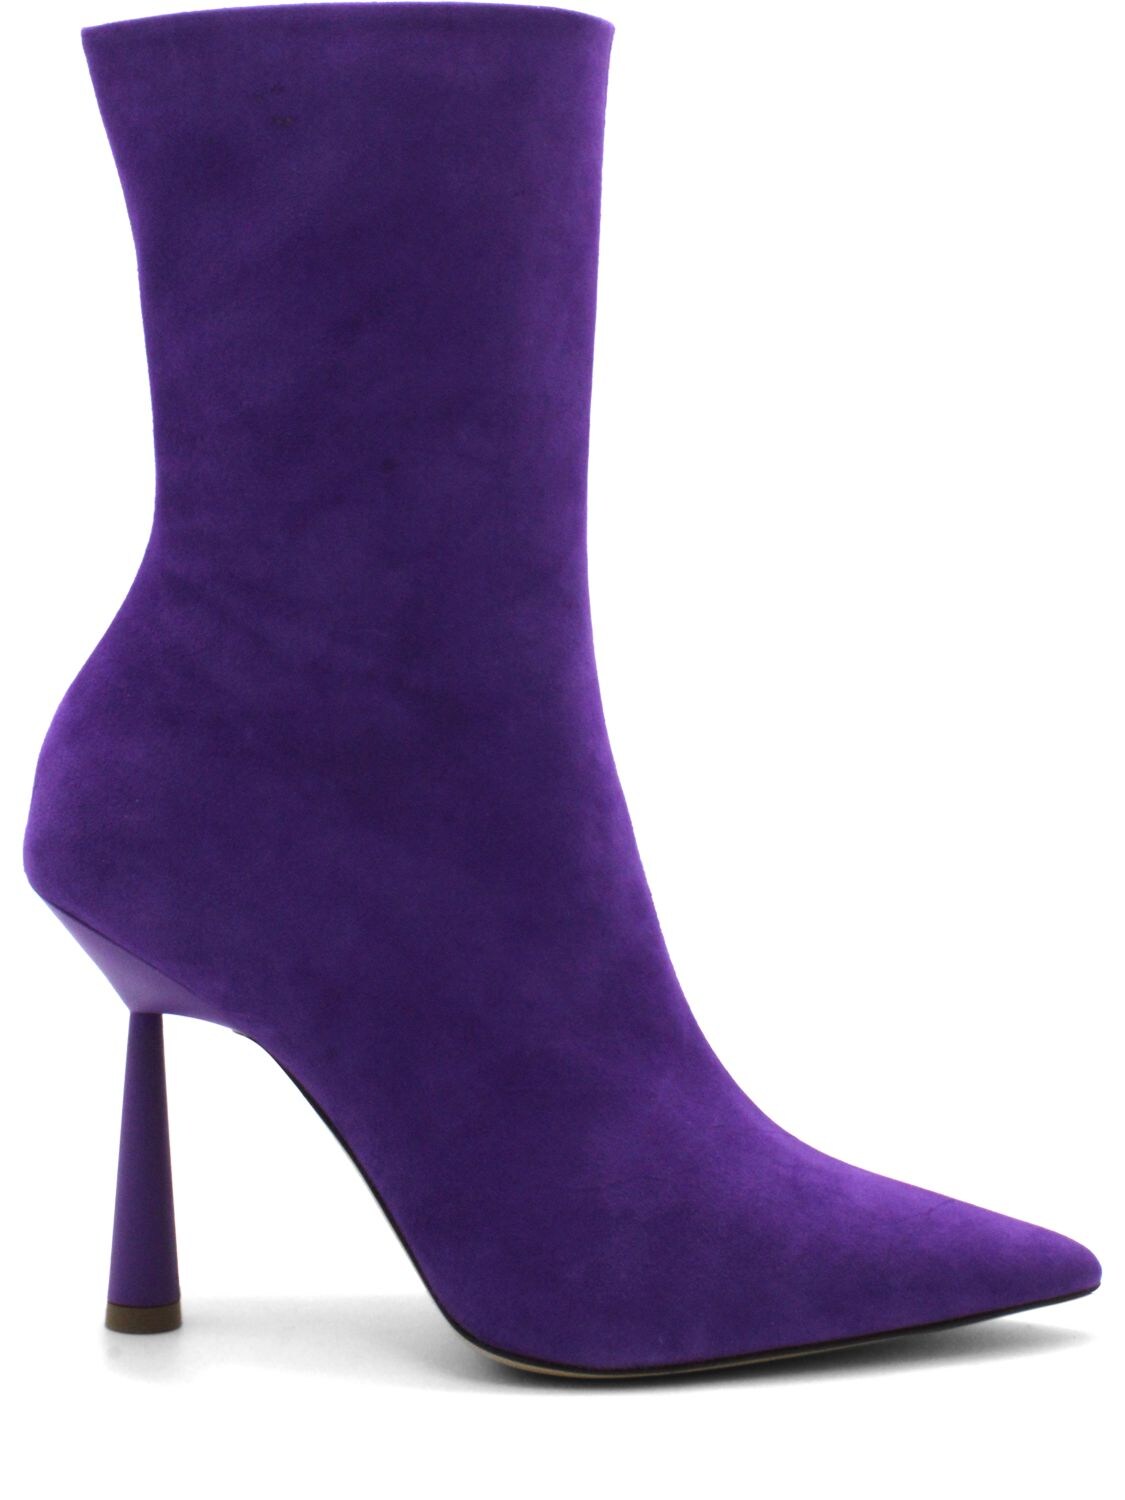 Gia X Rhw Suede Ankle Boots Luisaviaroma Women Shoes Boots Ankle Boots 